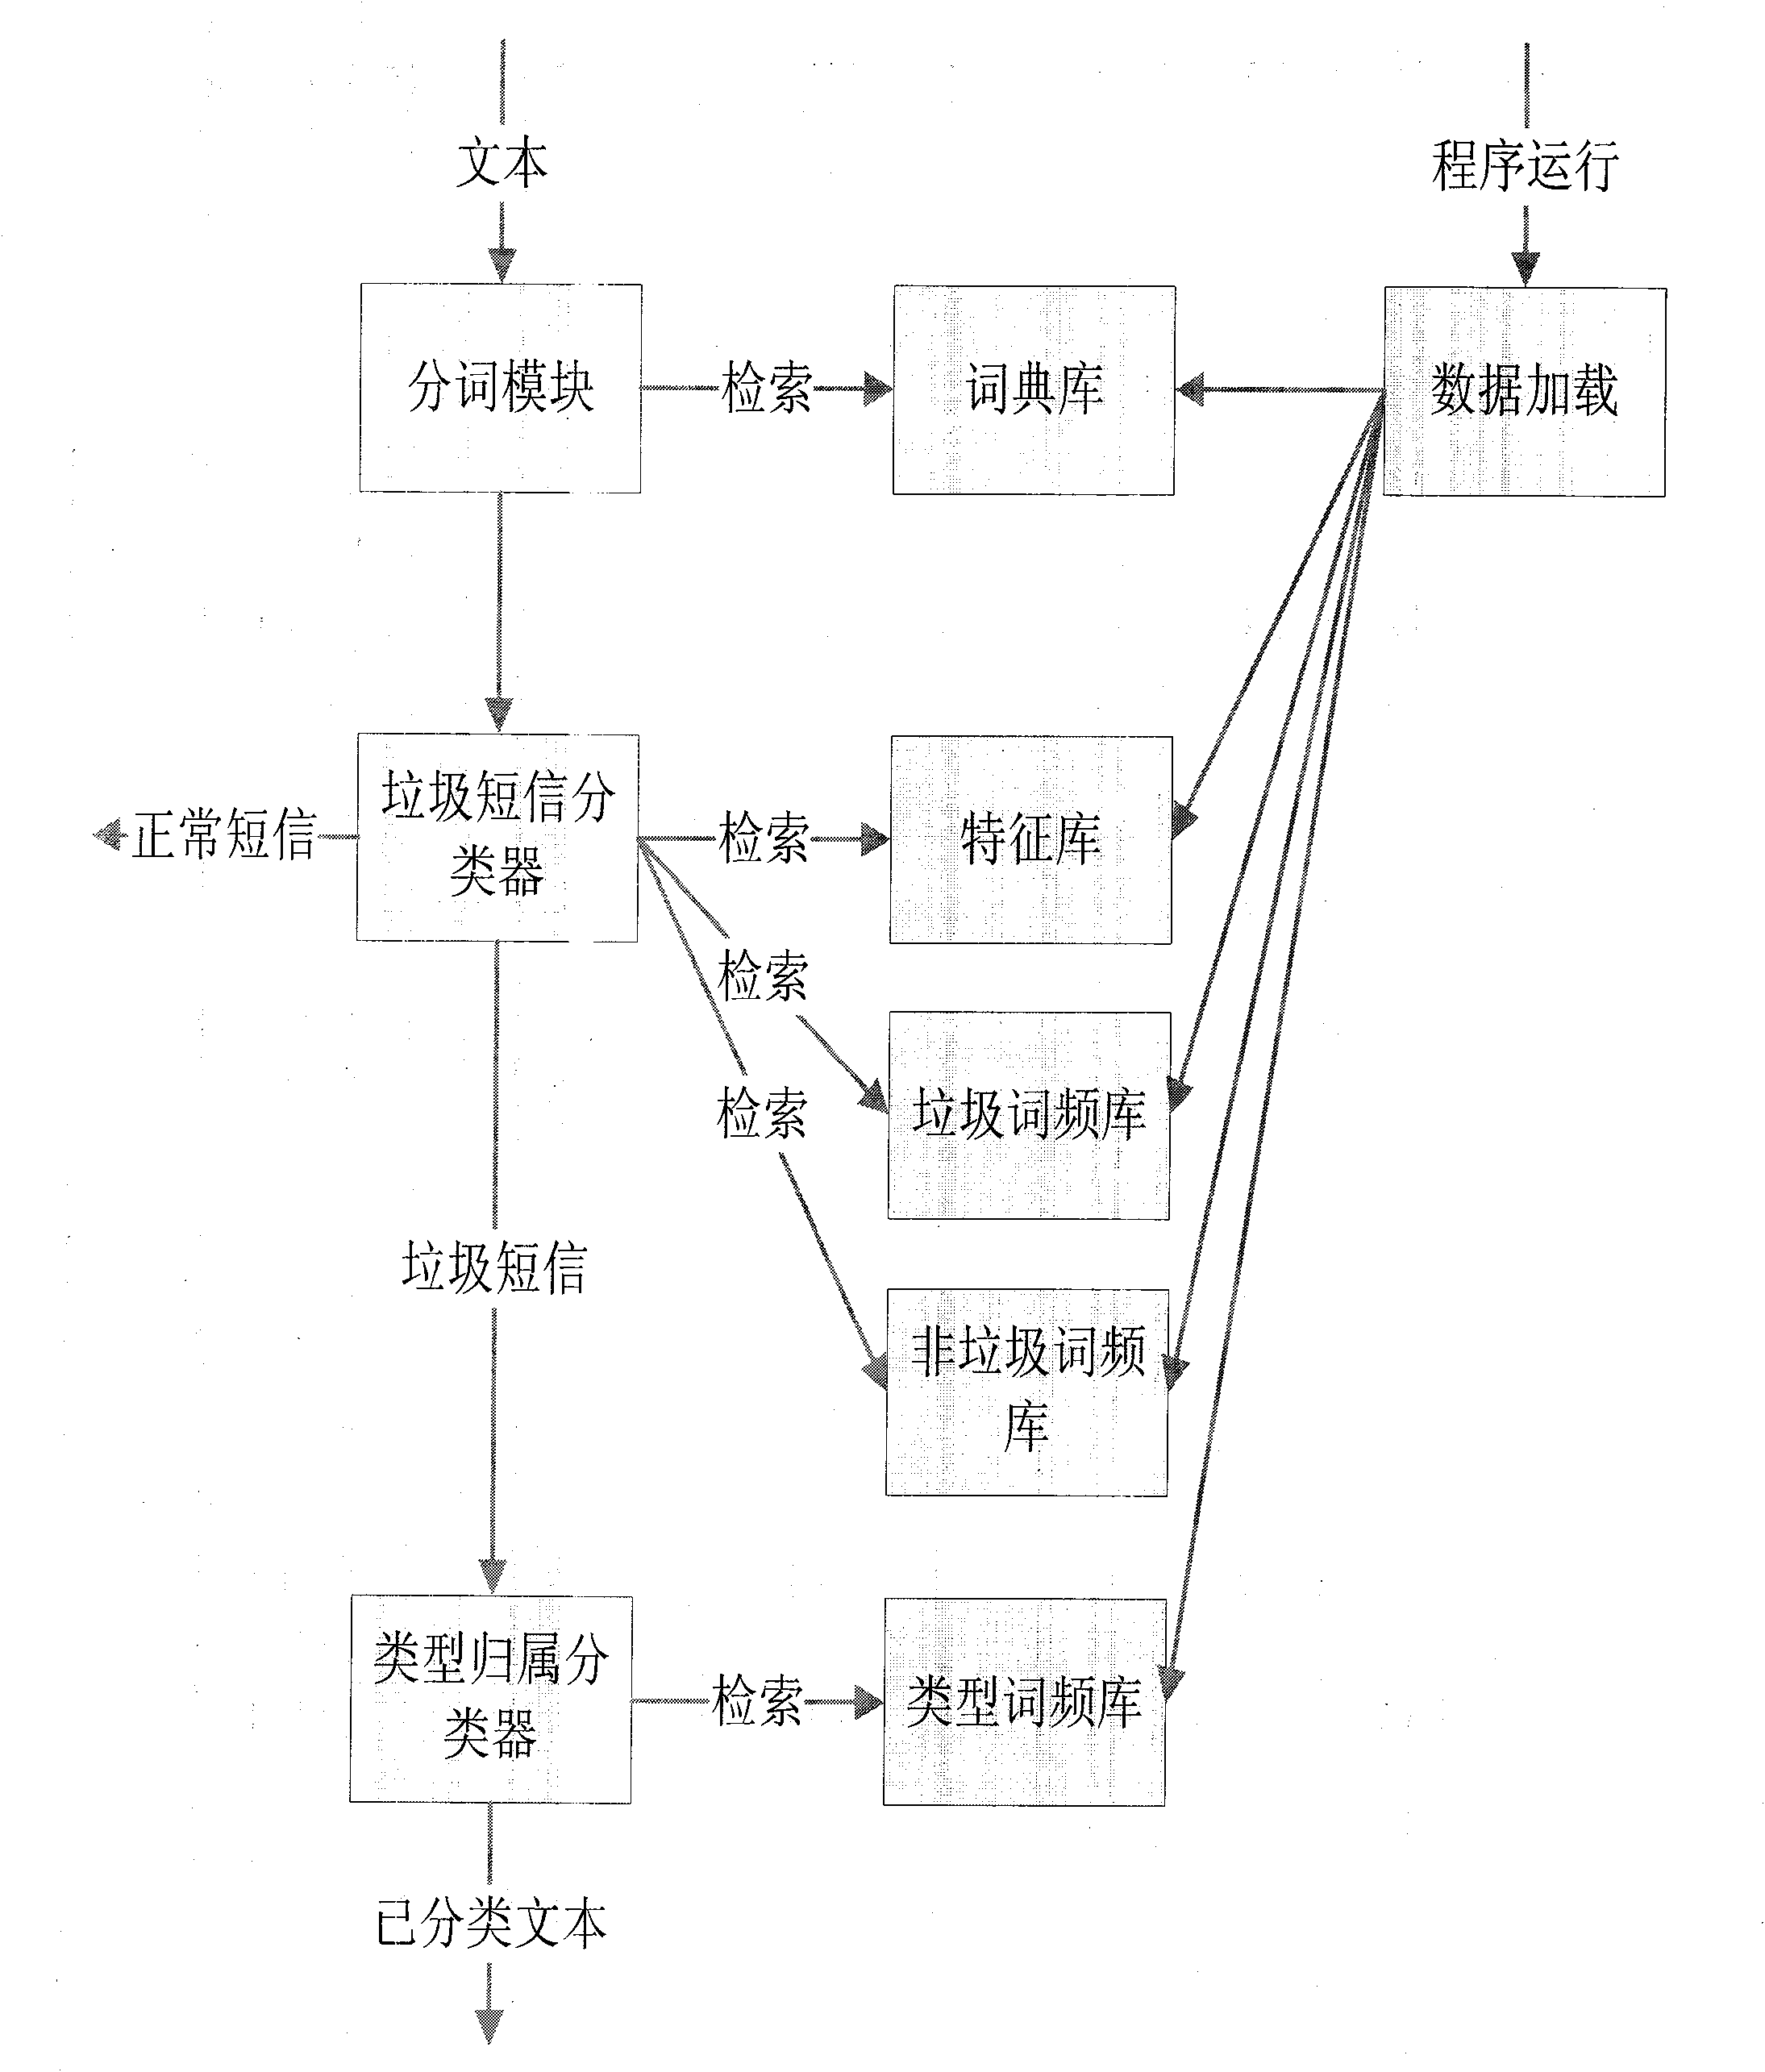 Method and system for filtering and classifying short messages